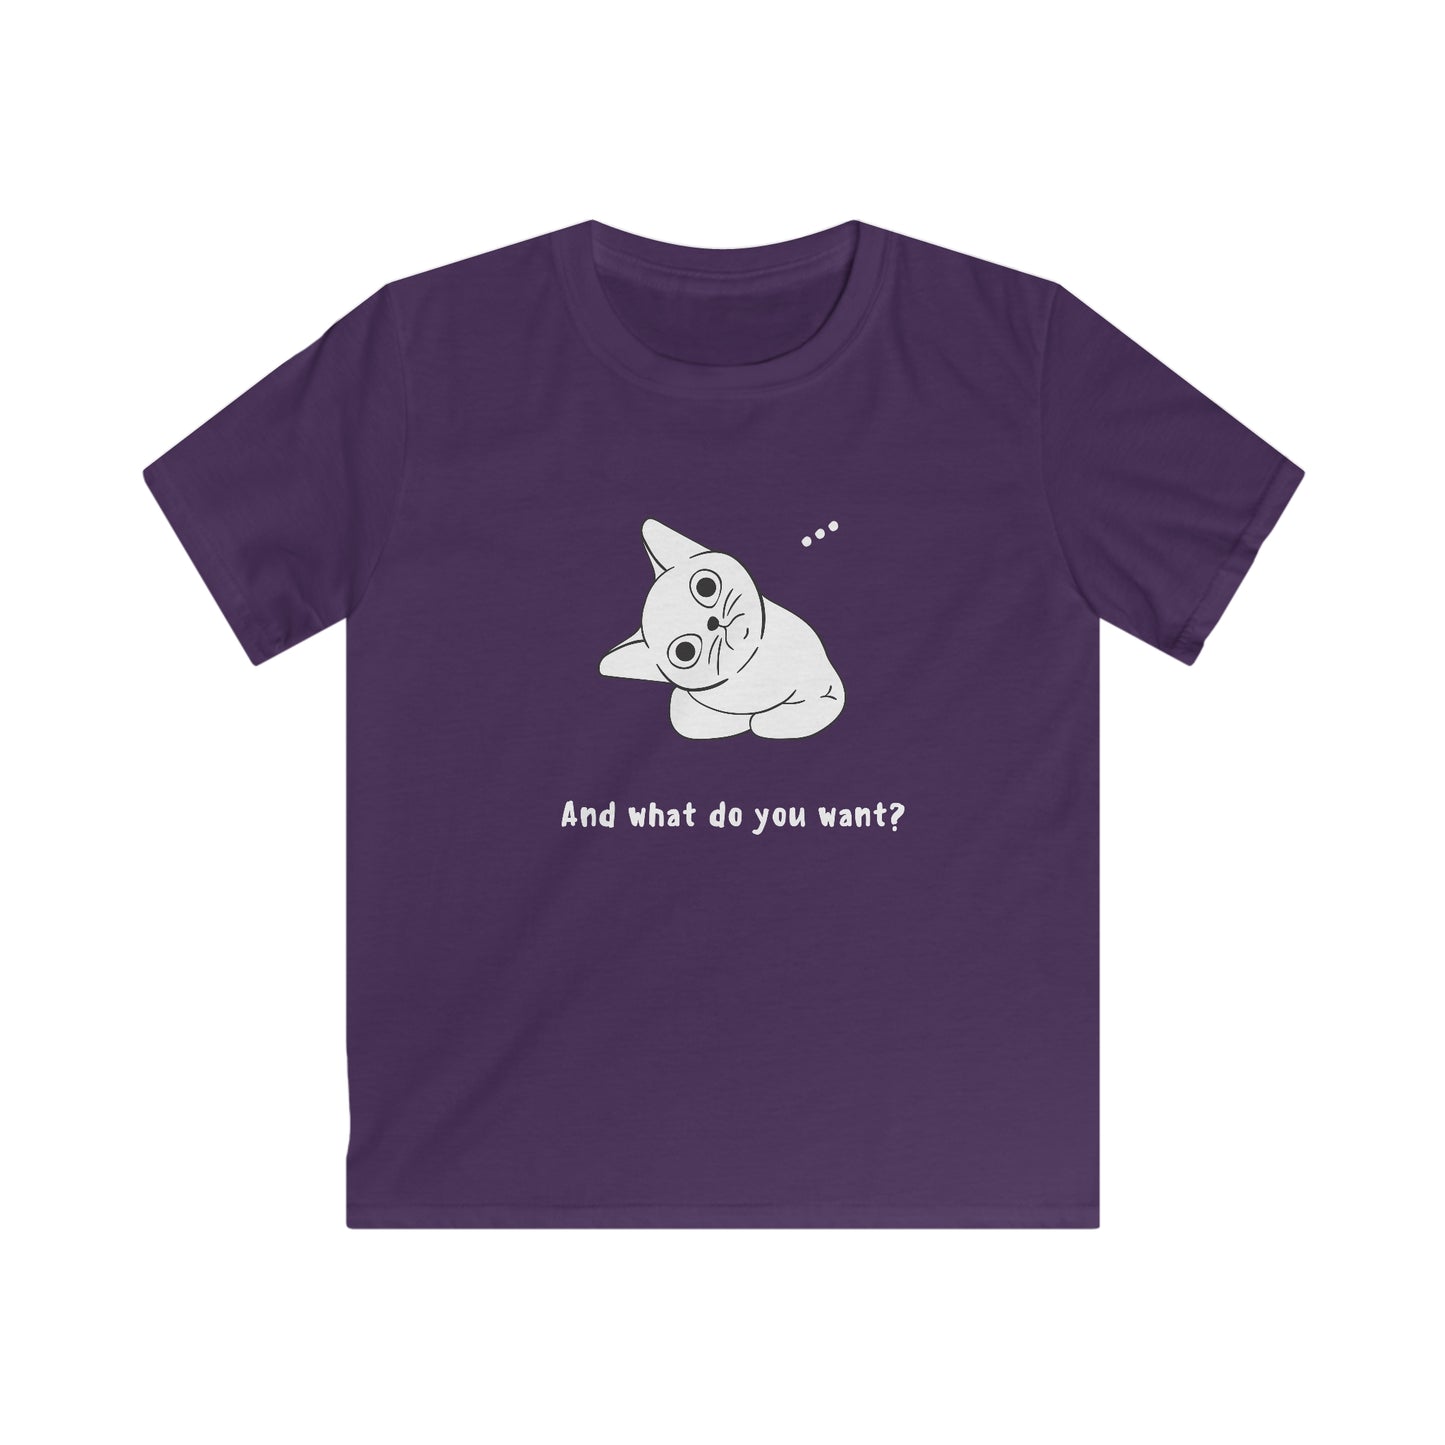 Vexing Cat Wondering What You Want. Kids Softstyle Tee